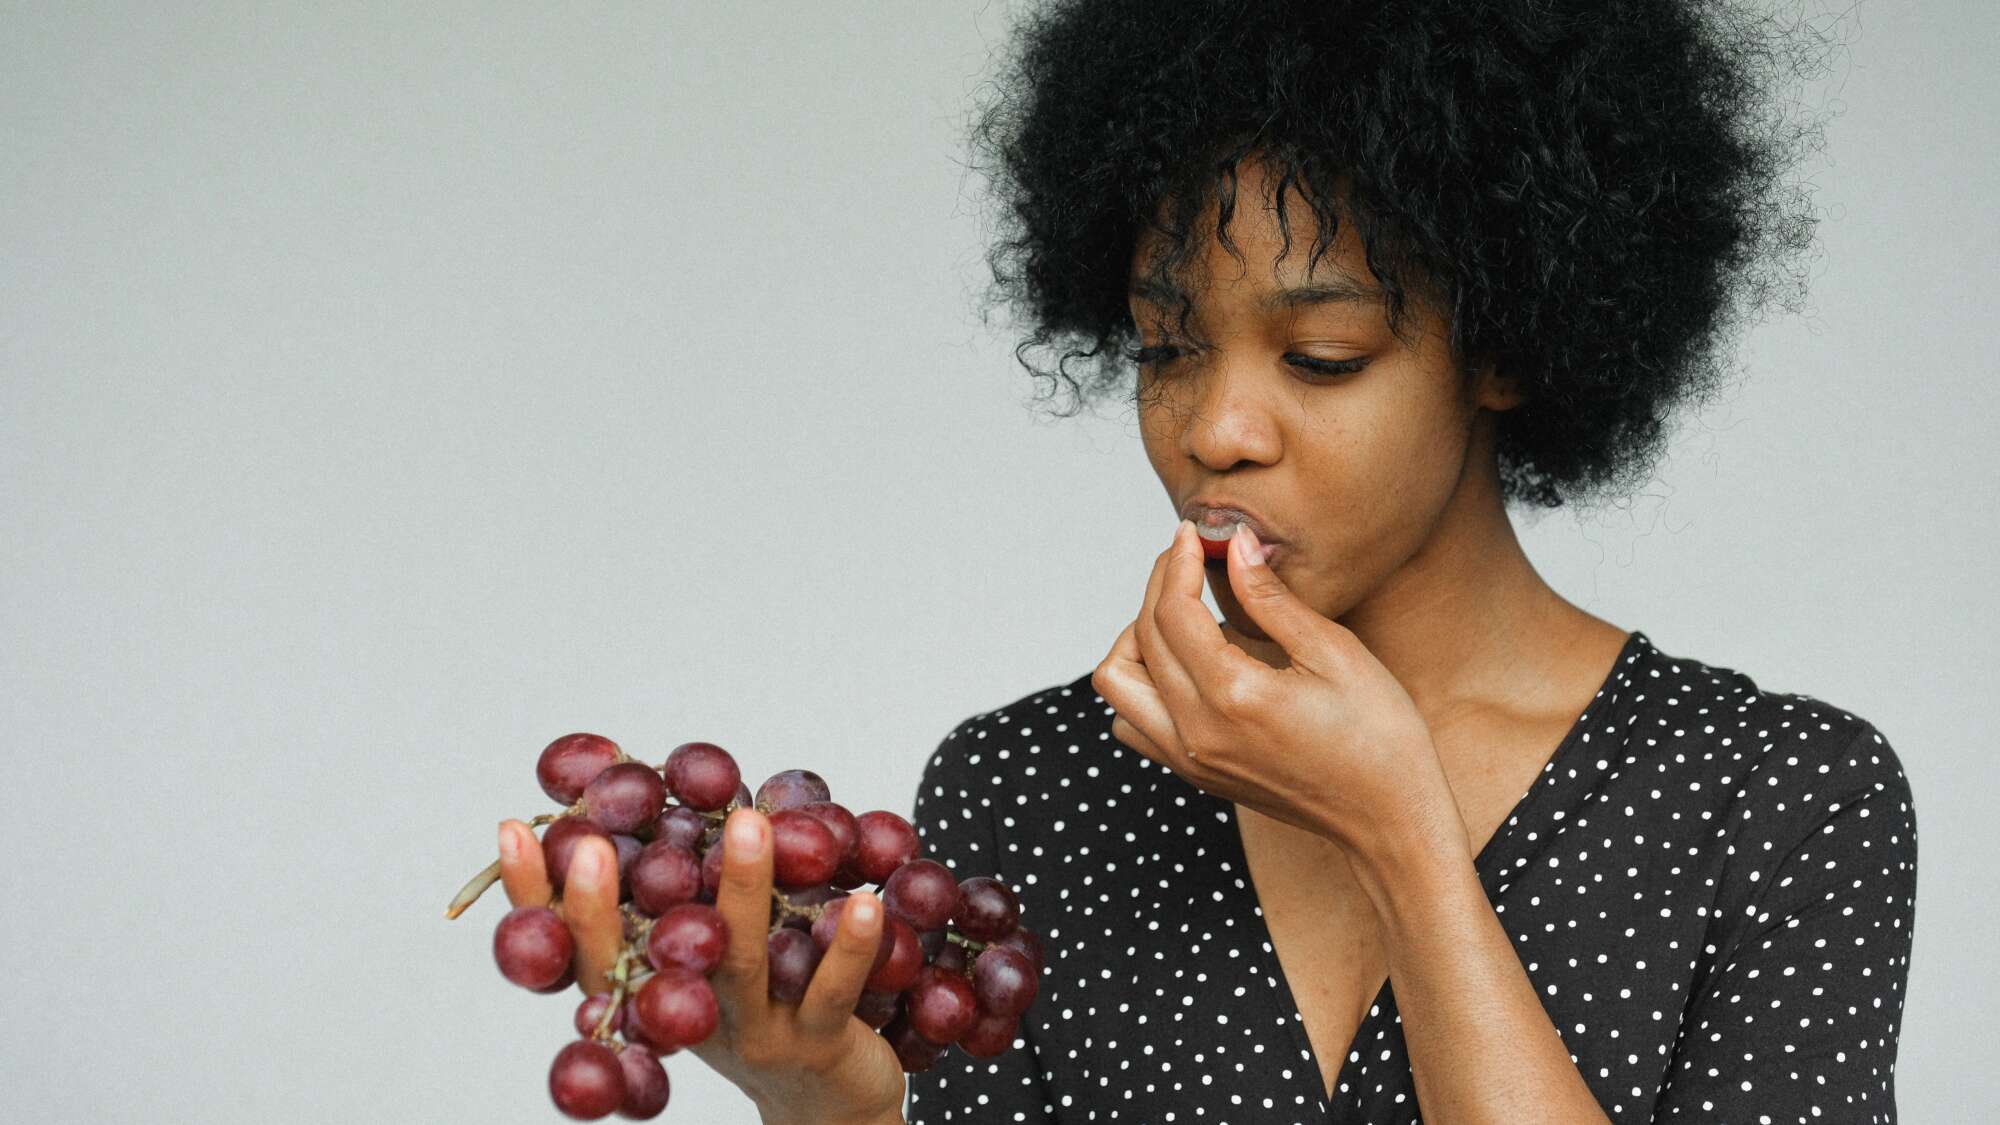 Photo of woman with black curly hair eating a handful of red grapes